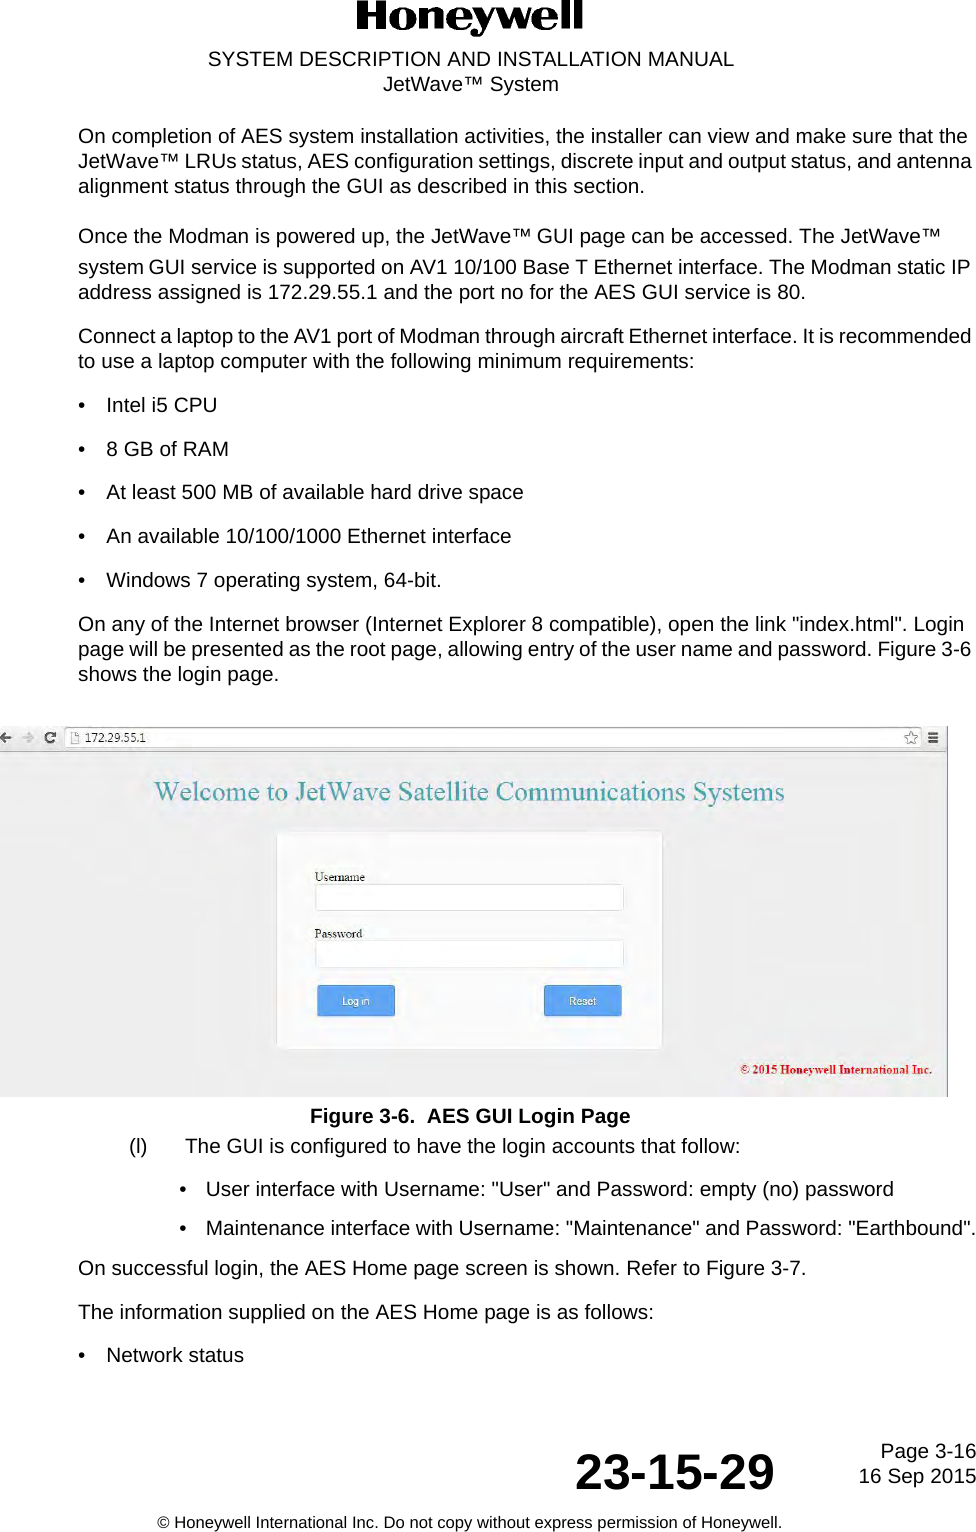 Page 3-1616 Sep 201523-15-29SYSTEM DESCRIPTION AND INSTALLATION MANUALJetWave™ System© Honeywell International Inc. Do not copy without express permission of Honeywell.On completion of AES system installation activities, the installer can view and make sure that the JetWave™ LRUs status, AES configuration settings, discrete input and output status, and antenna alignment status through the GUI as described in this section.Once the Modman is powered up, the JetWave™ GUI page can be accessed. The JetWave™ system GUI service is supported on AV1 10/100 Base T Ethernet interface. The Modman static IP address assigned is 172.29.55.1 and the port no for the AES GUI service is 80. Connect a laptop to the AV1 port of Modman through aircraft Ethernet interface. It is recommended to use a laptop computer with the following minimum requirements: • Intel i5 CPU • 8 GB of RAM • At least 500 MB of available hard drive space • An available 10/100/1000 Ethernet interface • Windows 7 operating system, 64-bit. On any of the Internet browser (Internet Explorer 8 compatible), open the link &quot;index.html&quot;. Login page will be presented as the root page, allowing entry of the user name and password. Figure 3-6 shows the login page. Figure 3-6.  AES GUI Login Page(l) The GUI is configured to have the login accounts that follow: • User interface with Username: &quot;User&quot; and Password: empty (no) password• Maintenance interface with Username: &quot;Maintenance&quot; and Password: &quot;Earthbound&quot;.On successful login, the AES Home page screen is shown. Refer to Figure 3-7.The information supplied on the AES Home page is as follows:• Network status